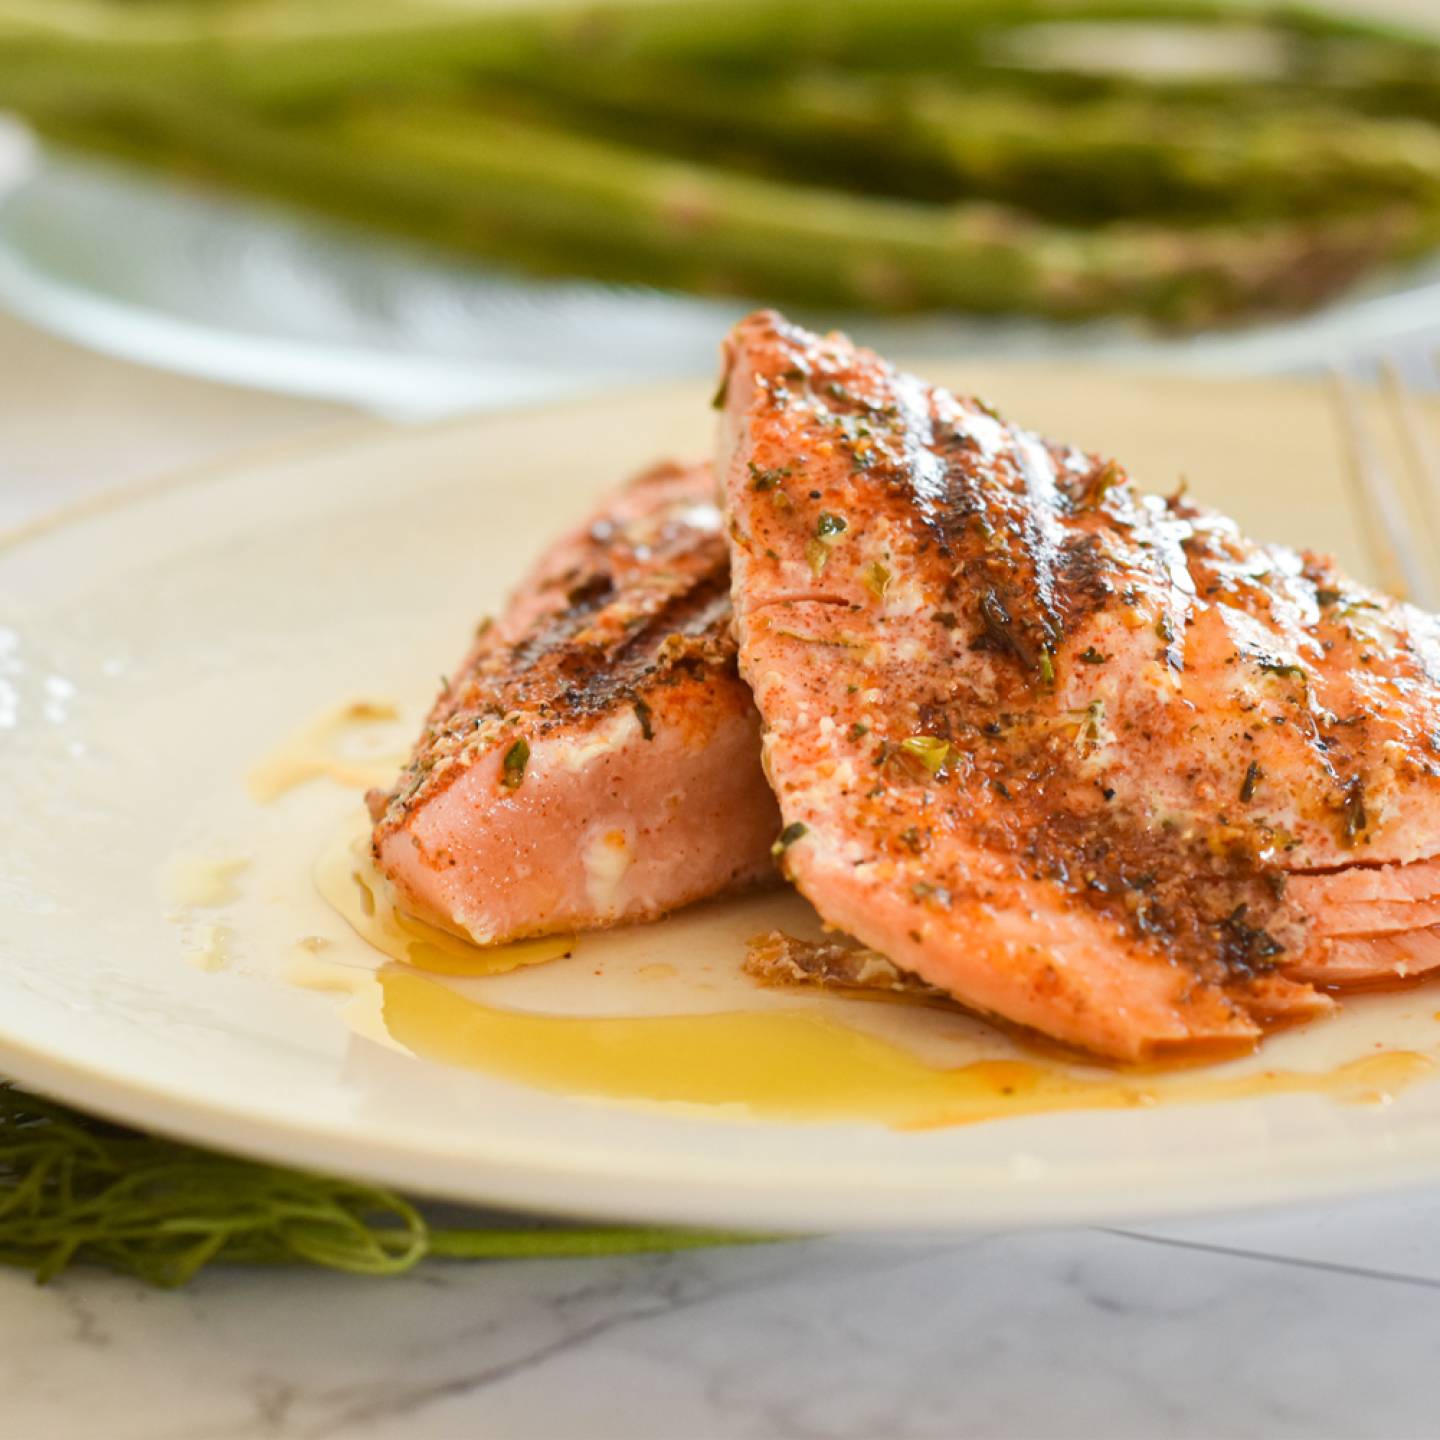 Grilled salmon with a Cajun spice rub on a plate with asparagus and salad./